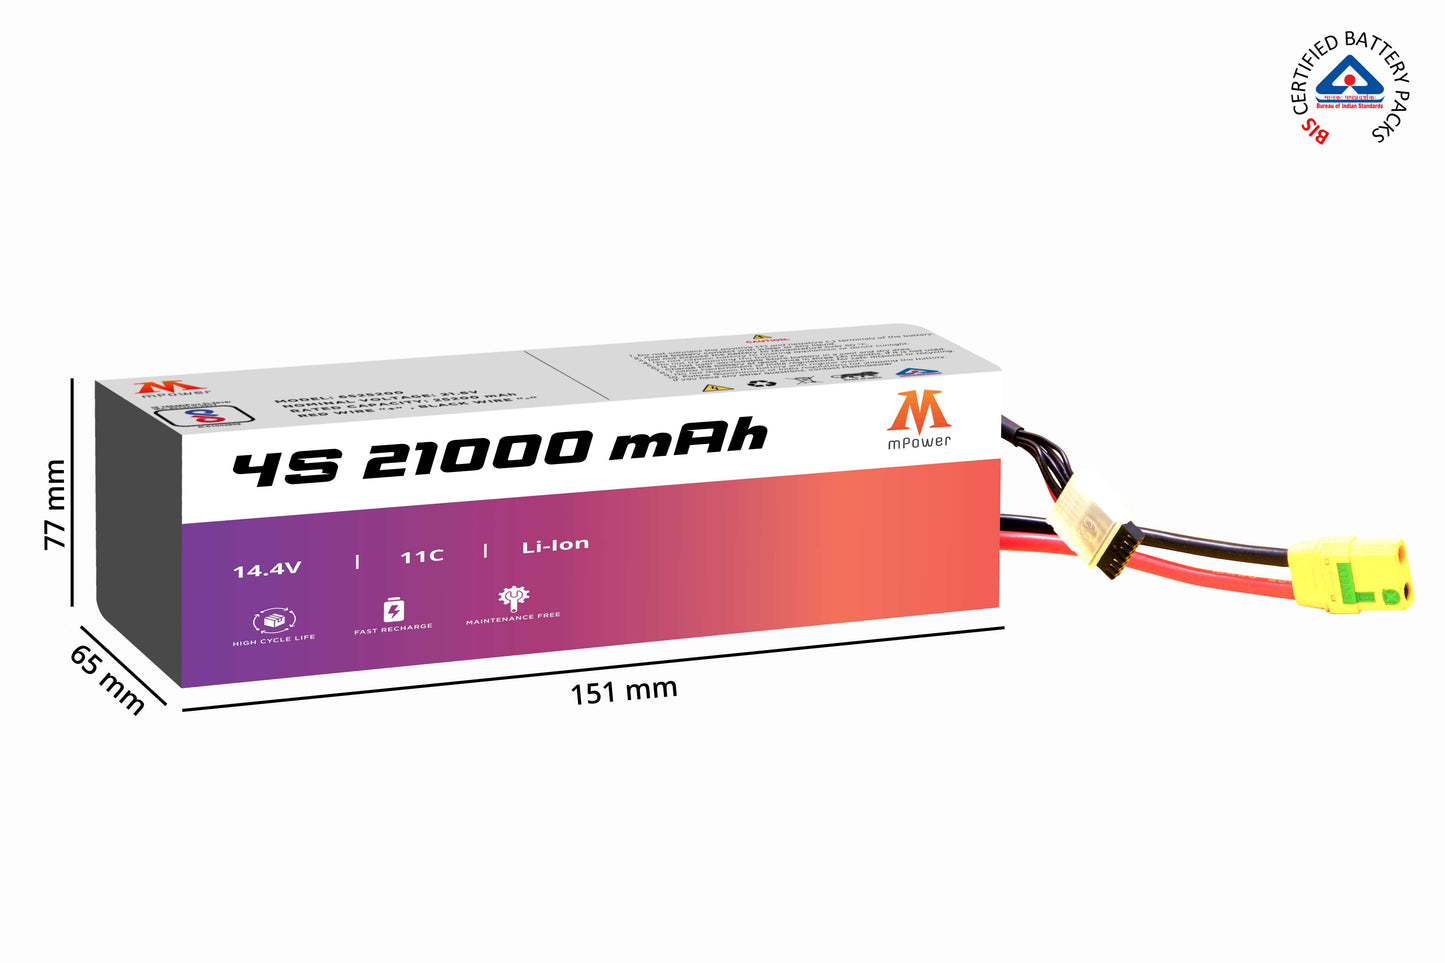 mPower 4S 21000mAh Lithium-Ion Battery for Surveillance Drones